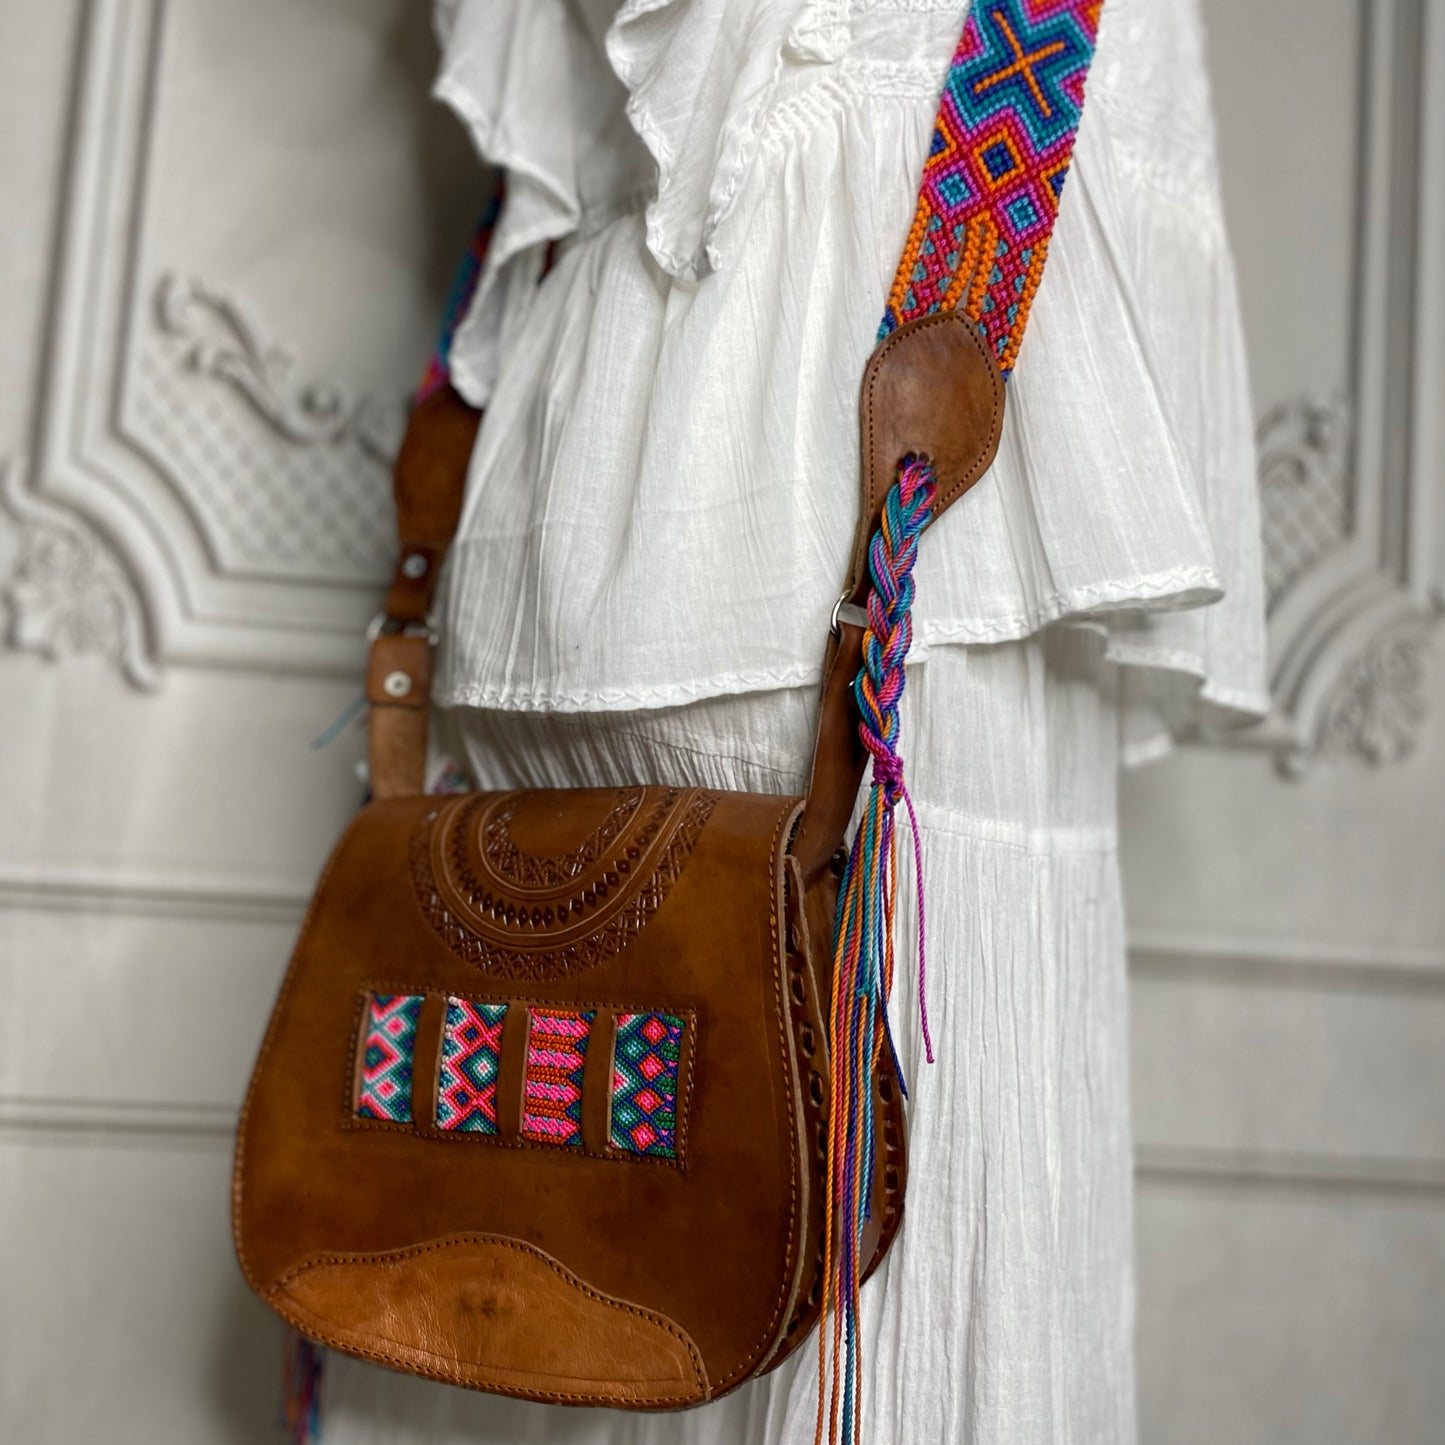 Mexican Leather Crossbody Saddle Bag - Hand Tooled